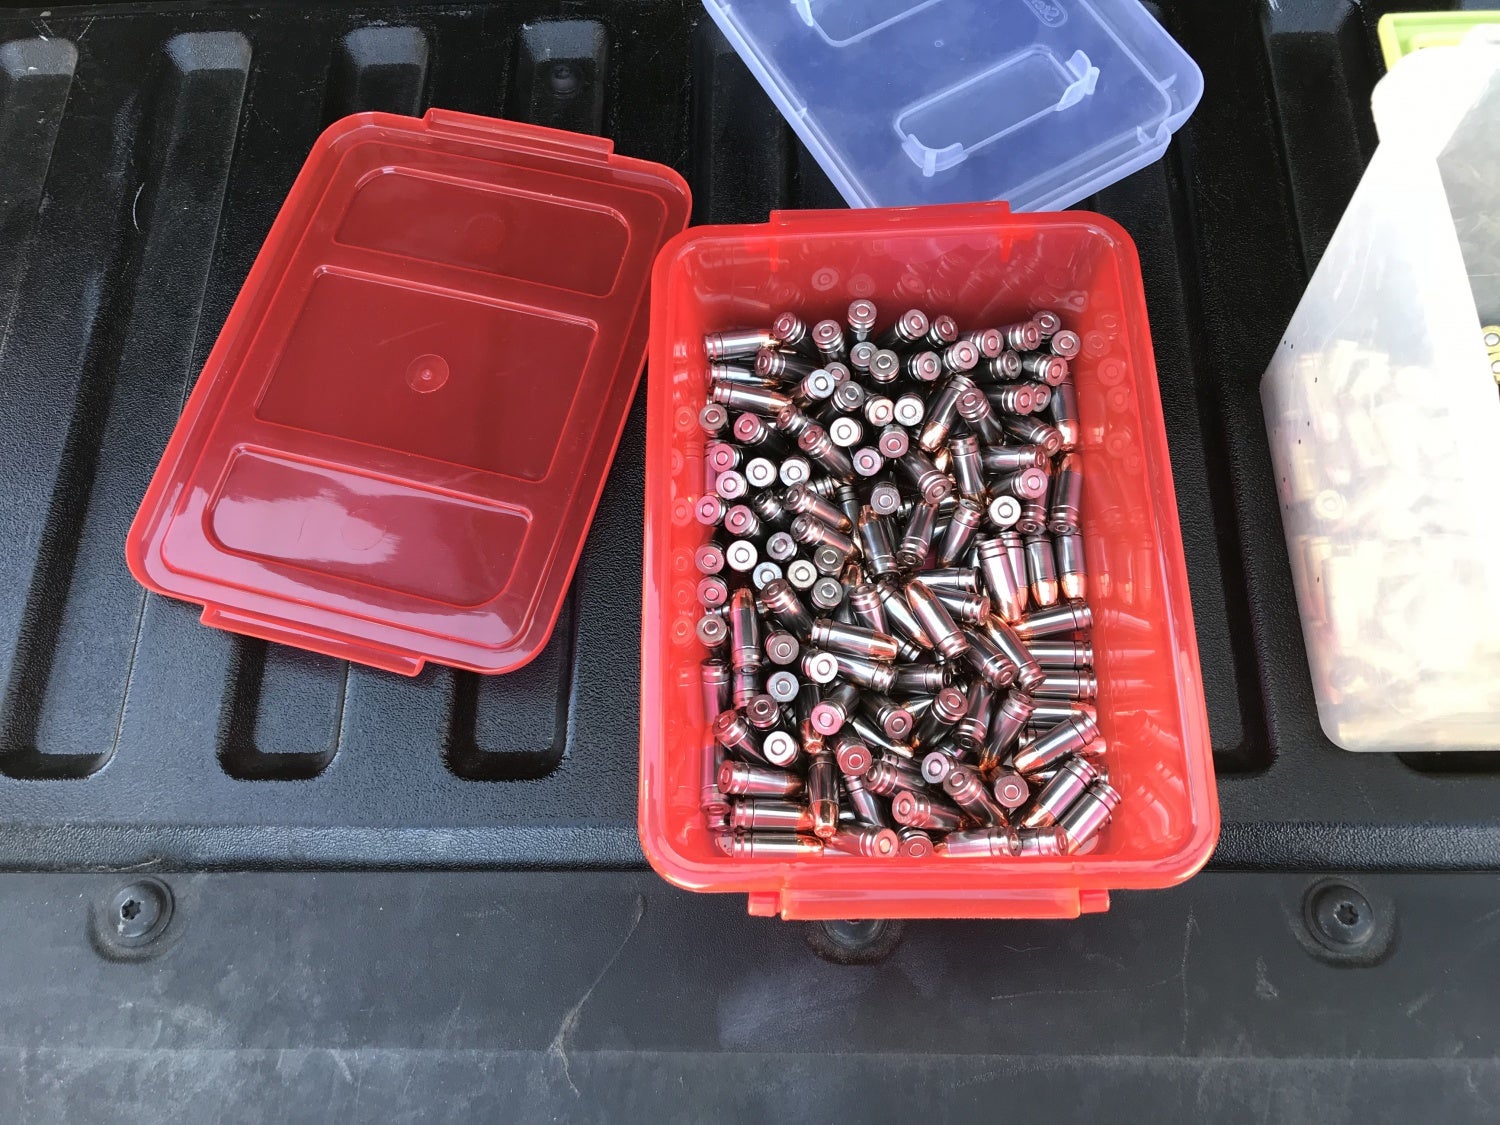 One of many containers of rounds this author loaded using the S3 Reload for testing.